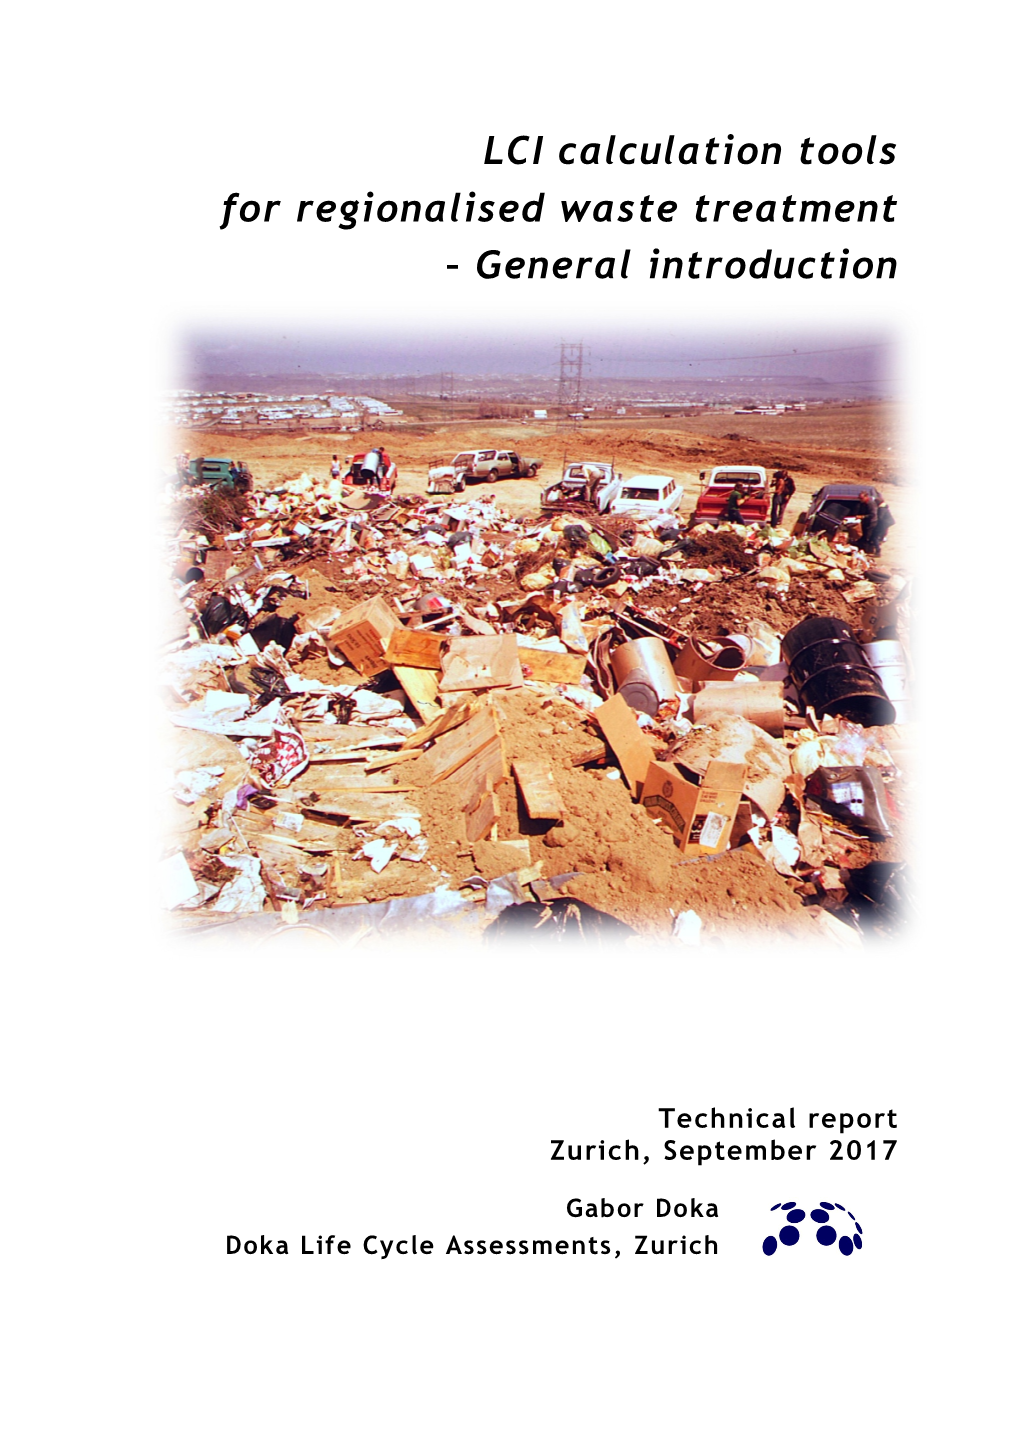 LCI Calculation Tools for Regionalised Waste Treatment – General Introduction